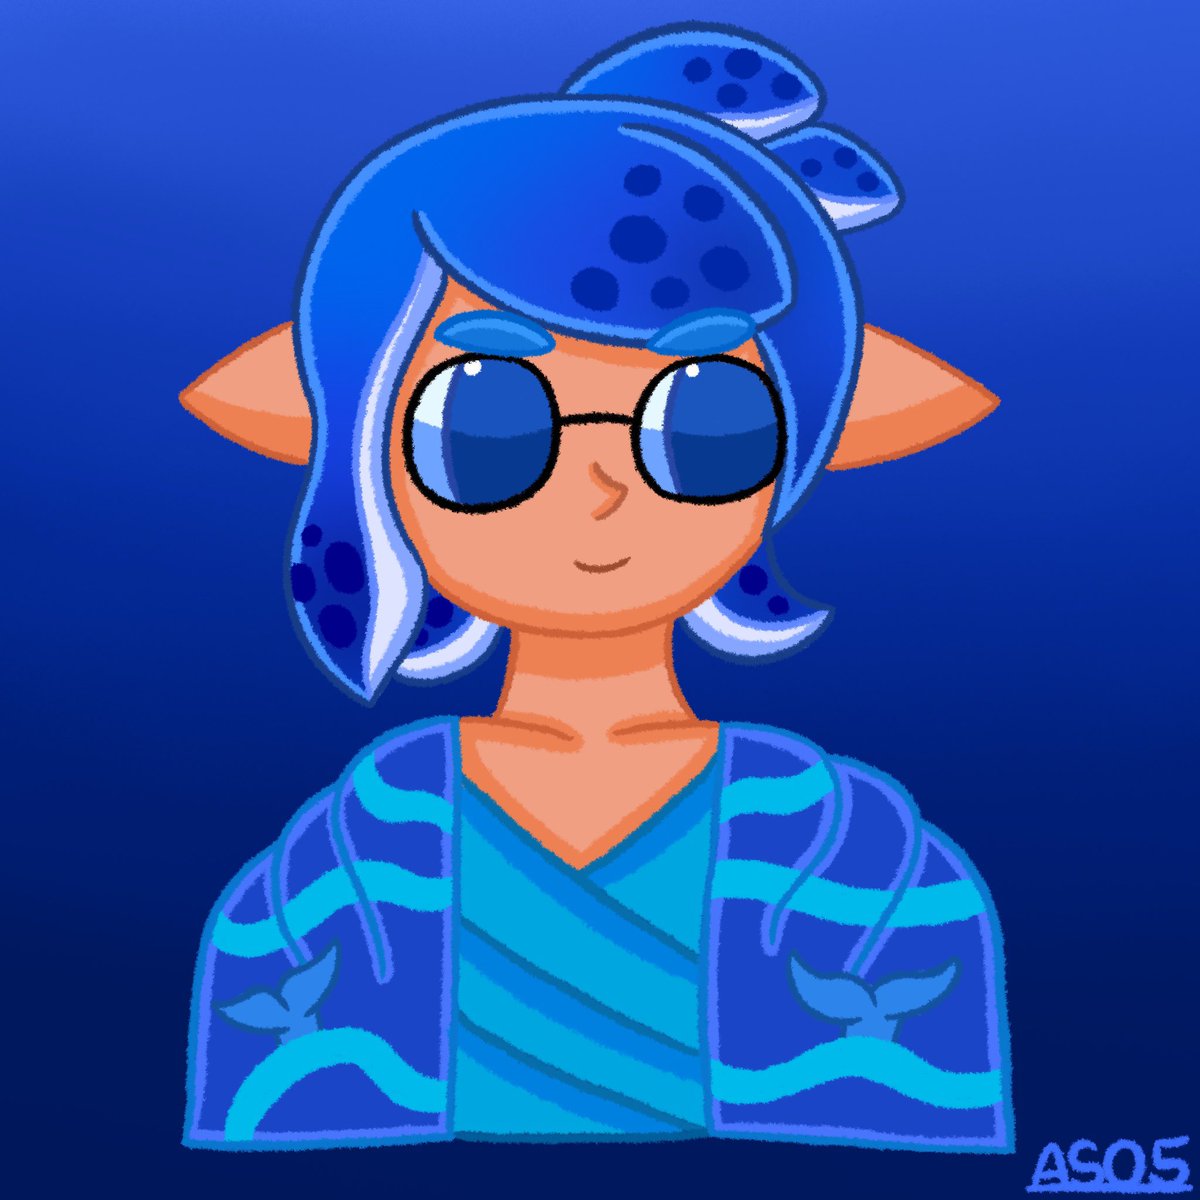 Next comes Hakuso, Caroline’s long lost biological father and the husband of Harumi. 

His redesign here looks slightly better ever since I drew him only once, and honestly I’m glad this redo came out well.

💙/🔄s are welcomed!

#ArtistOnTwitter #AS05 #SplatoonArt #SplatoonOC